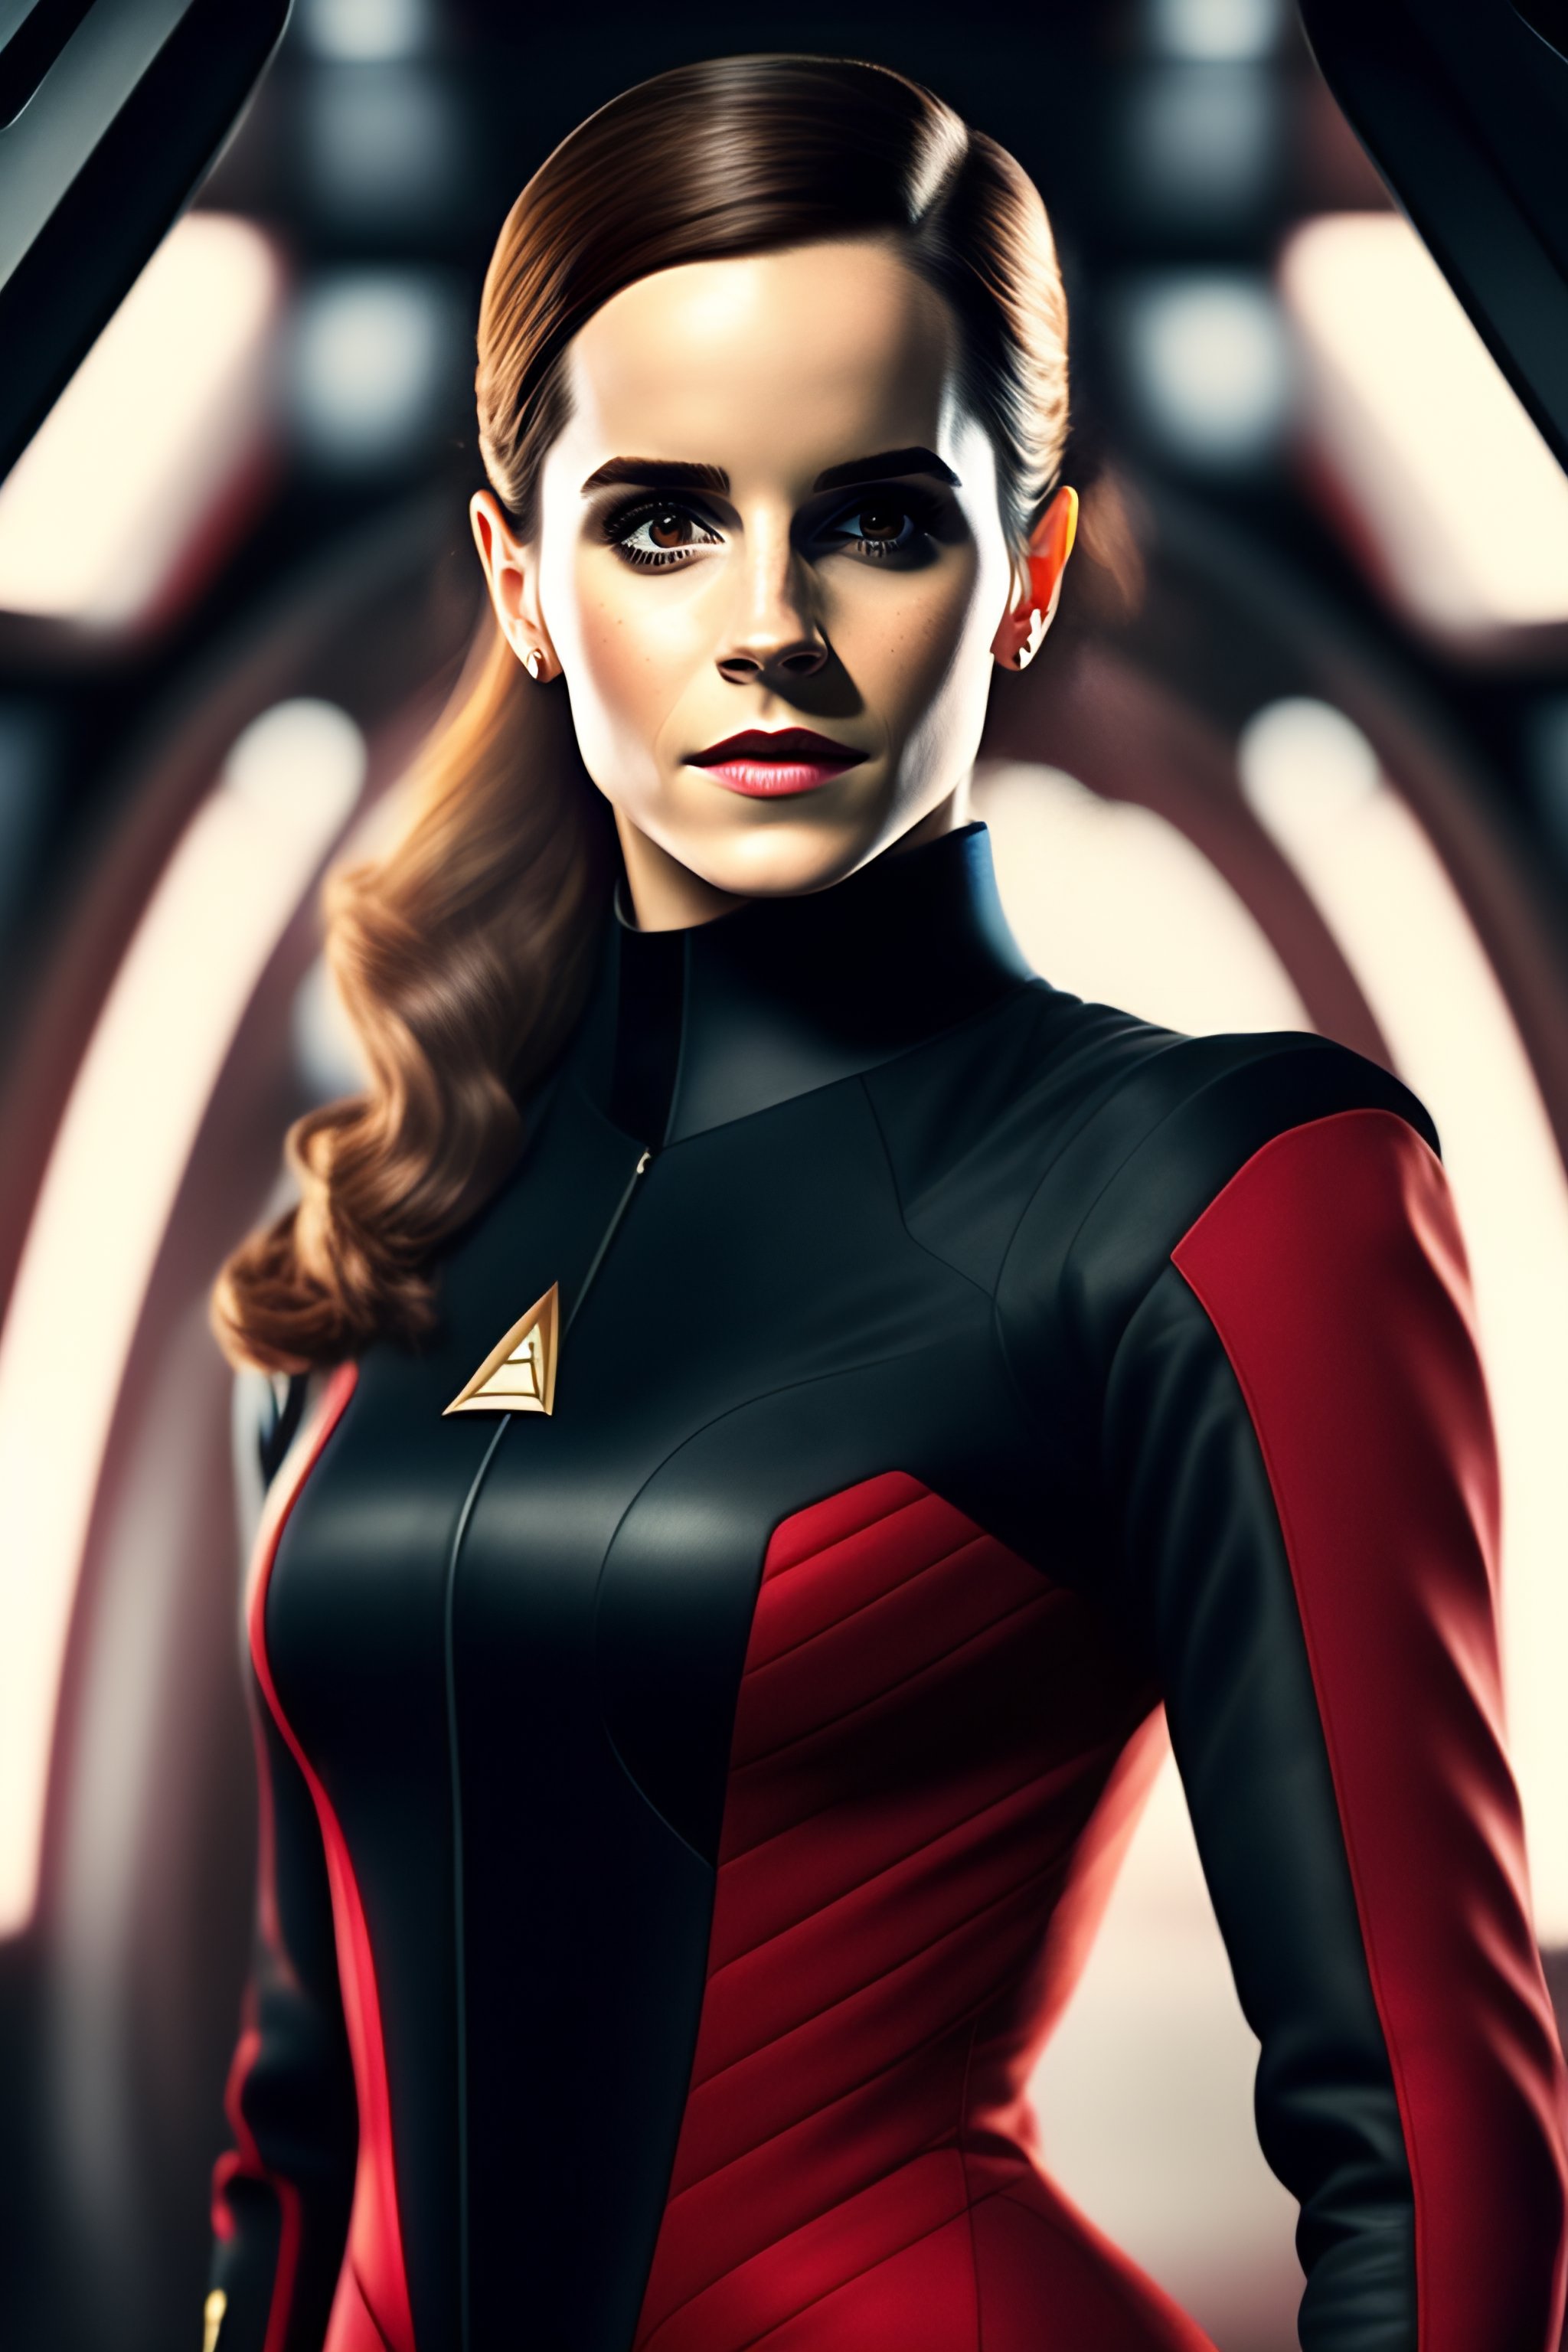 Lexica - Emma watson as startrek captain in action red black catsuit on ...